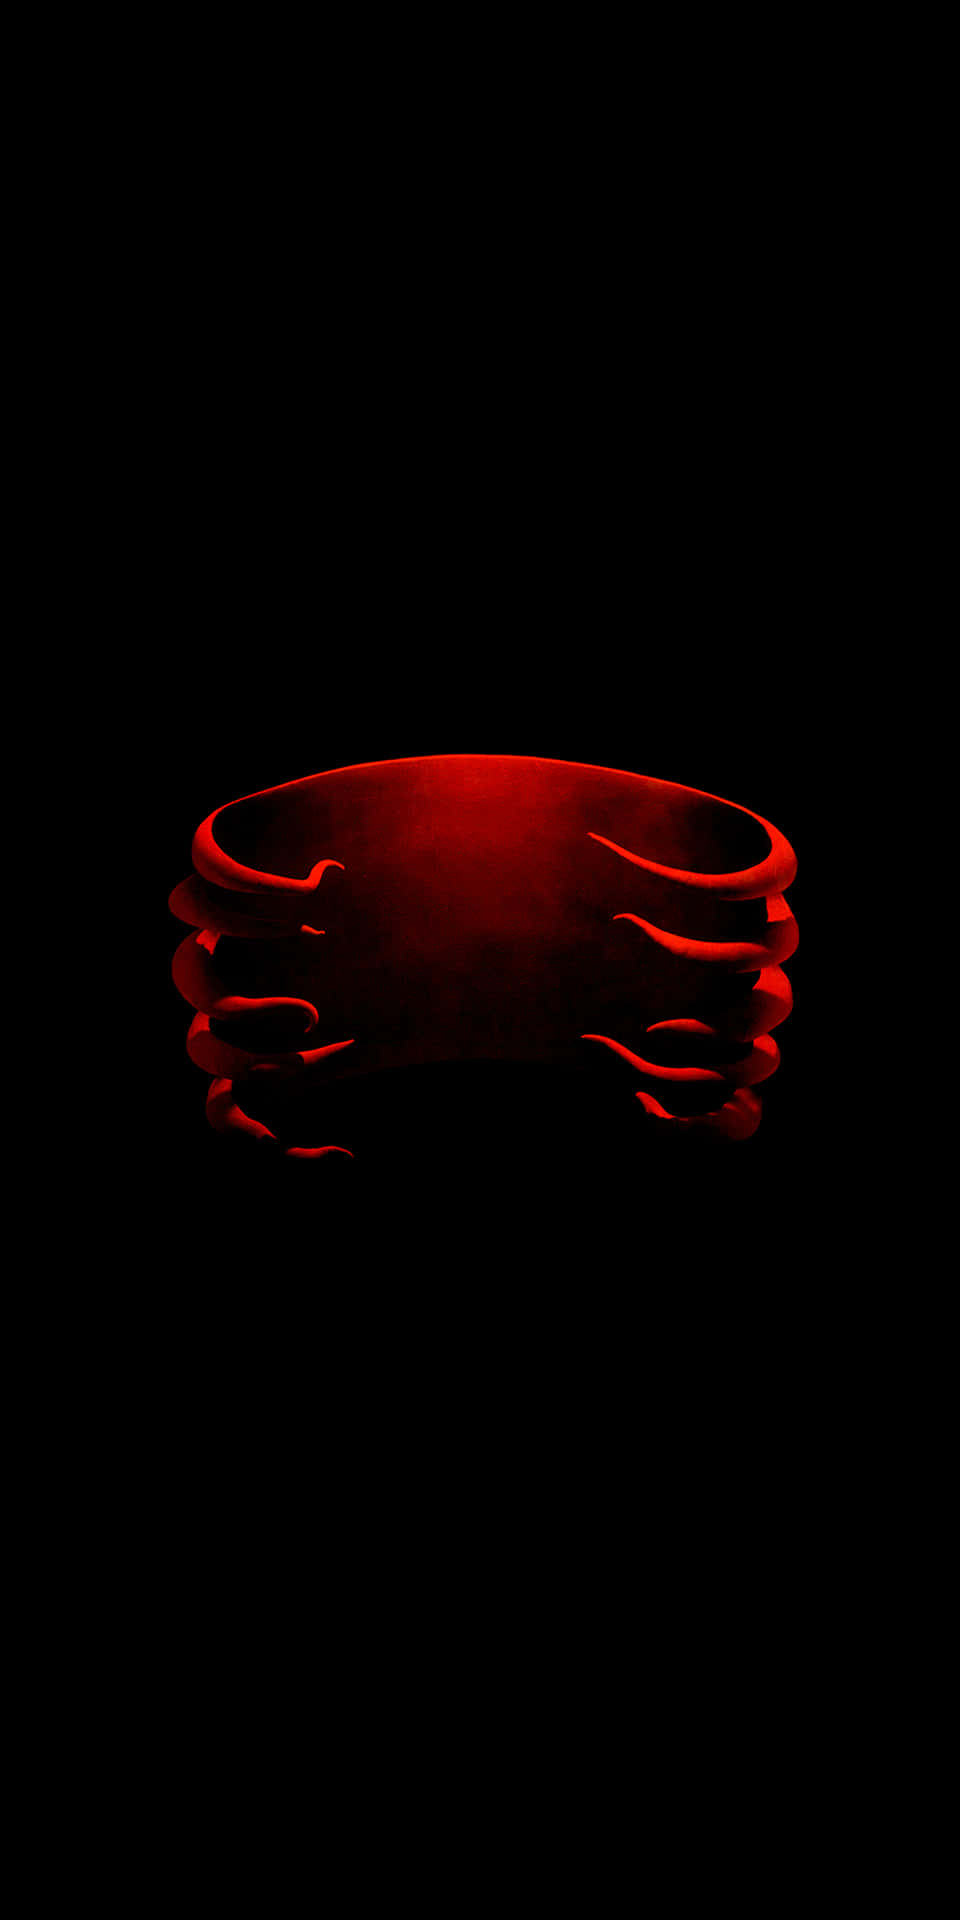 The renowned rock band Tool strives forward with their relentless energy and powerful sound. Wallpaper